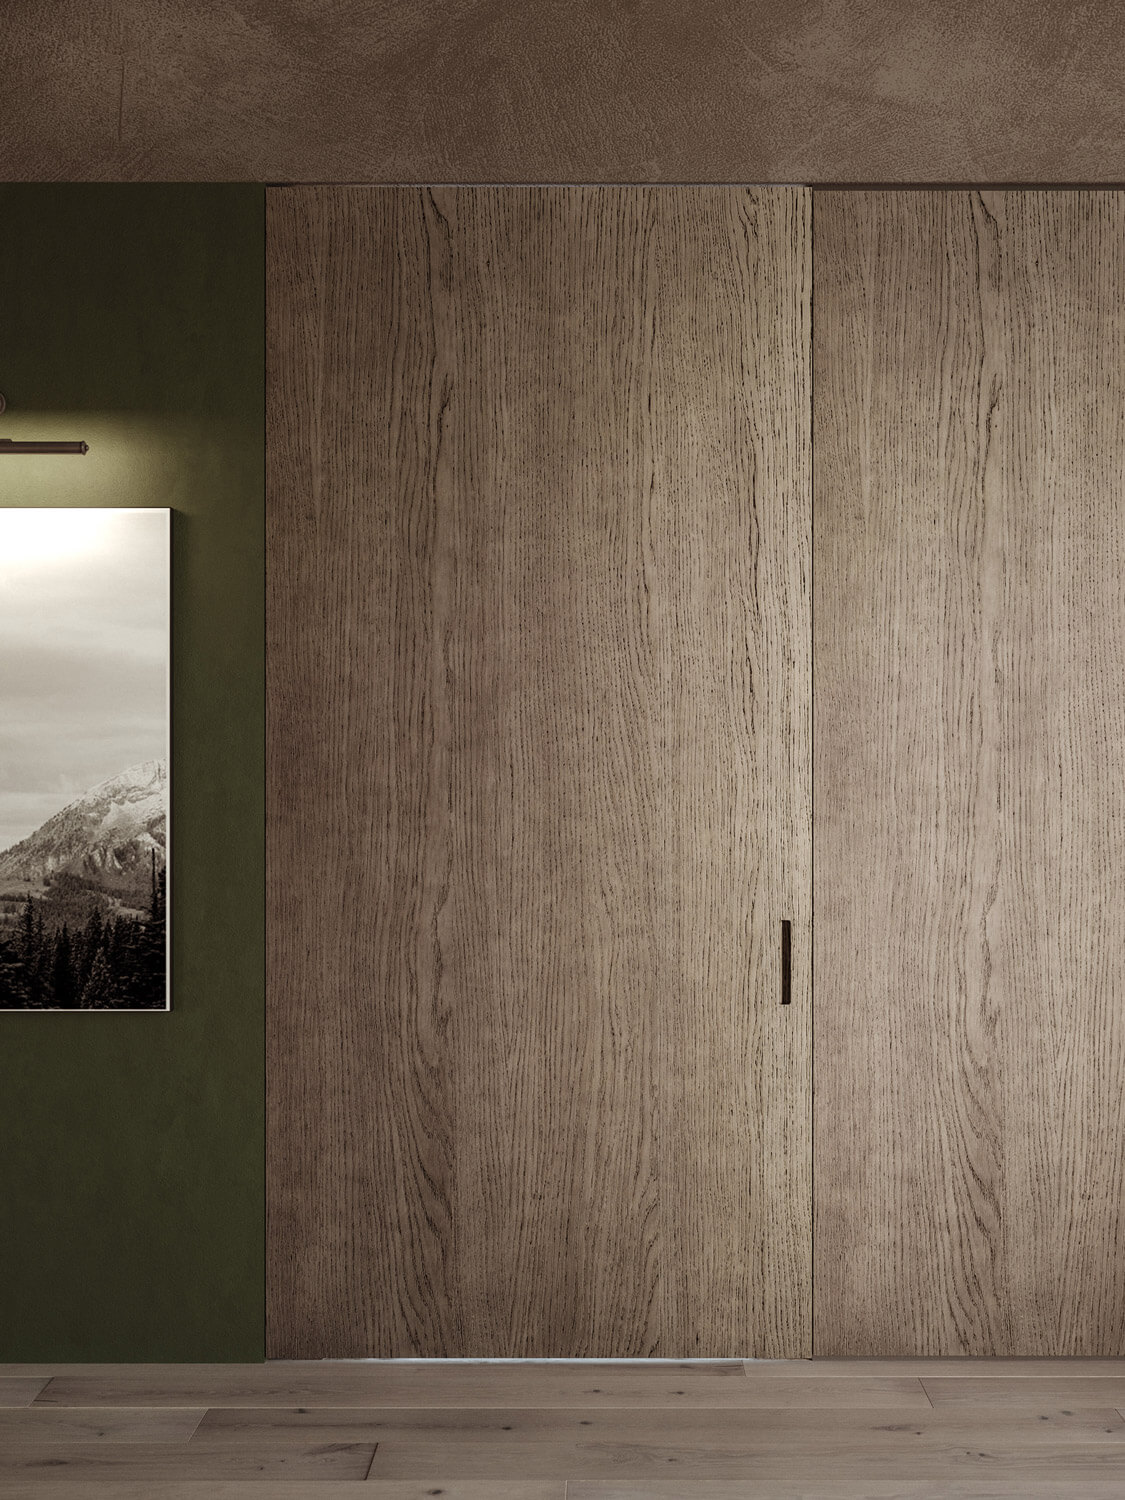 When closed, the pivot door integrates seamlessly with the surrounding wall in the same finish (shown: Graphite oak)